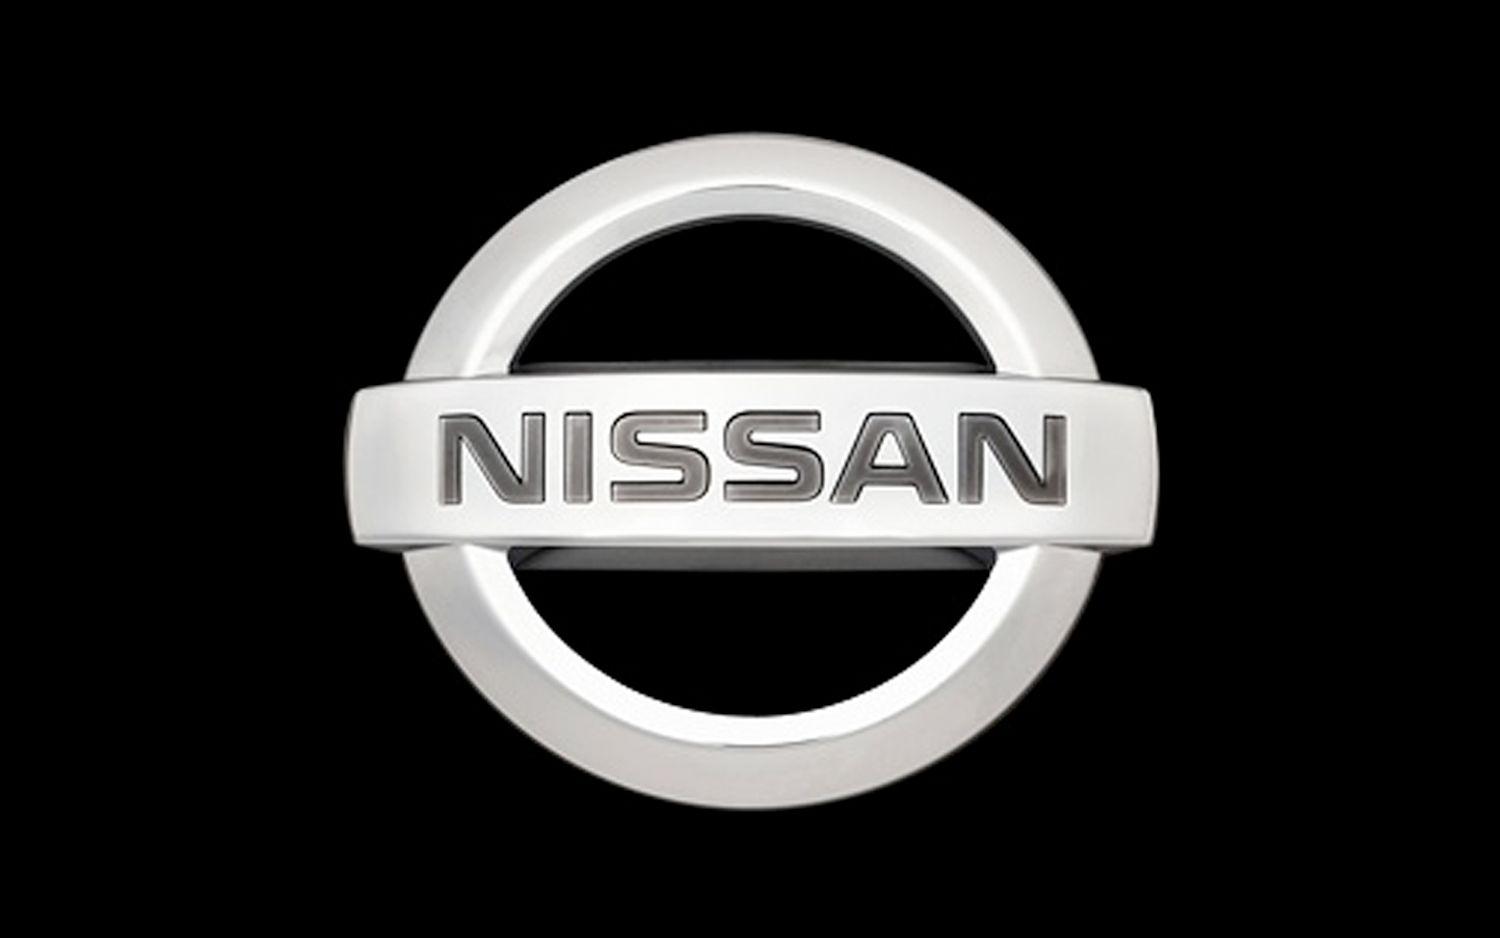 Black and White Automotive Logo - Nissan Logo, Nissan Car Symbol Meaning and History | Car Brand Names.com